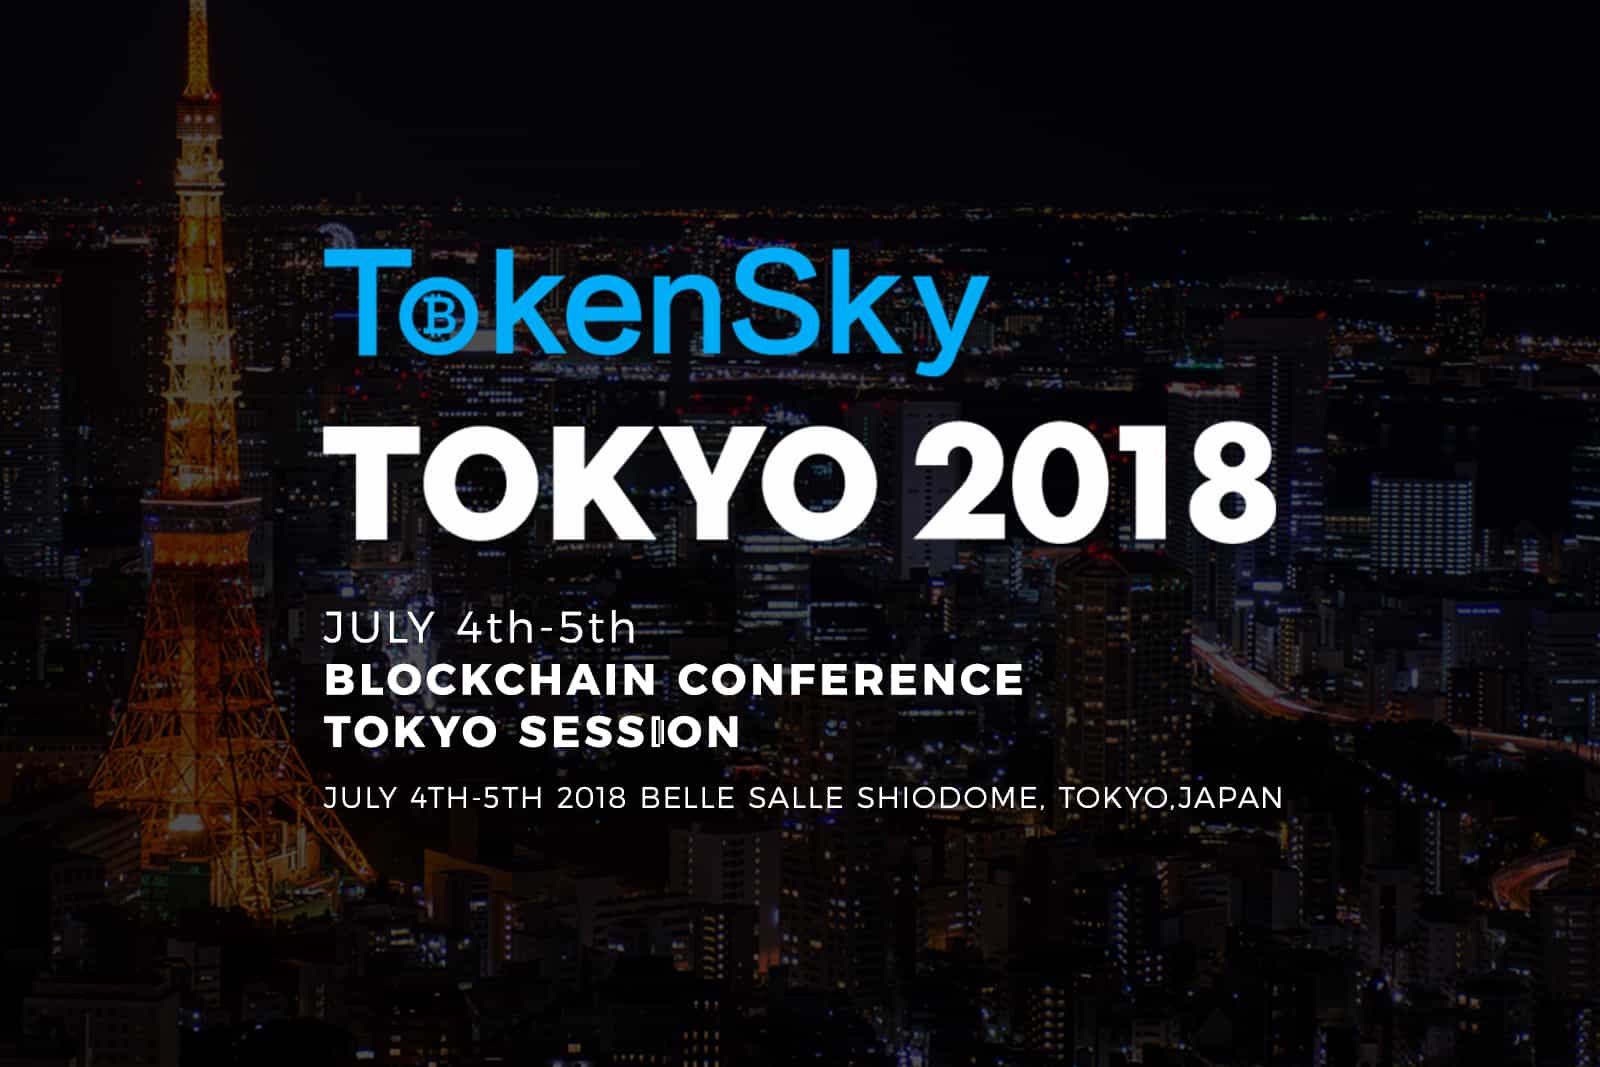 The most happening event: TokenSky Tokyo Blockchain Conference at Tokyo, Japan.